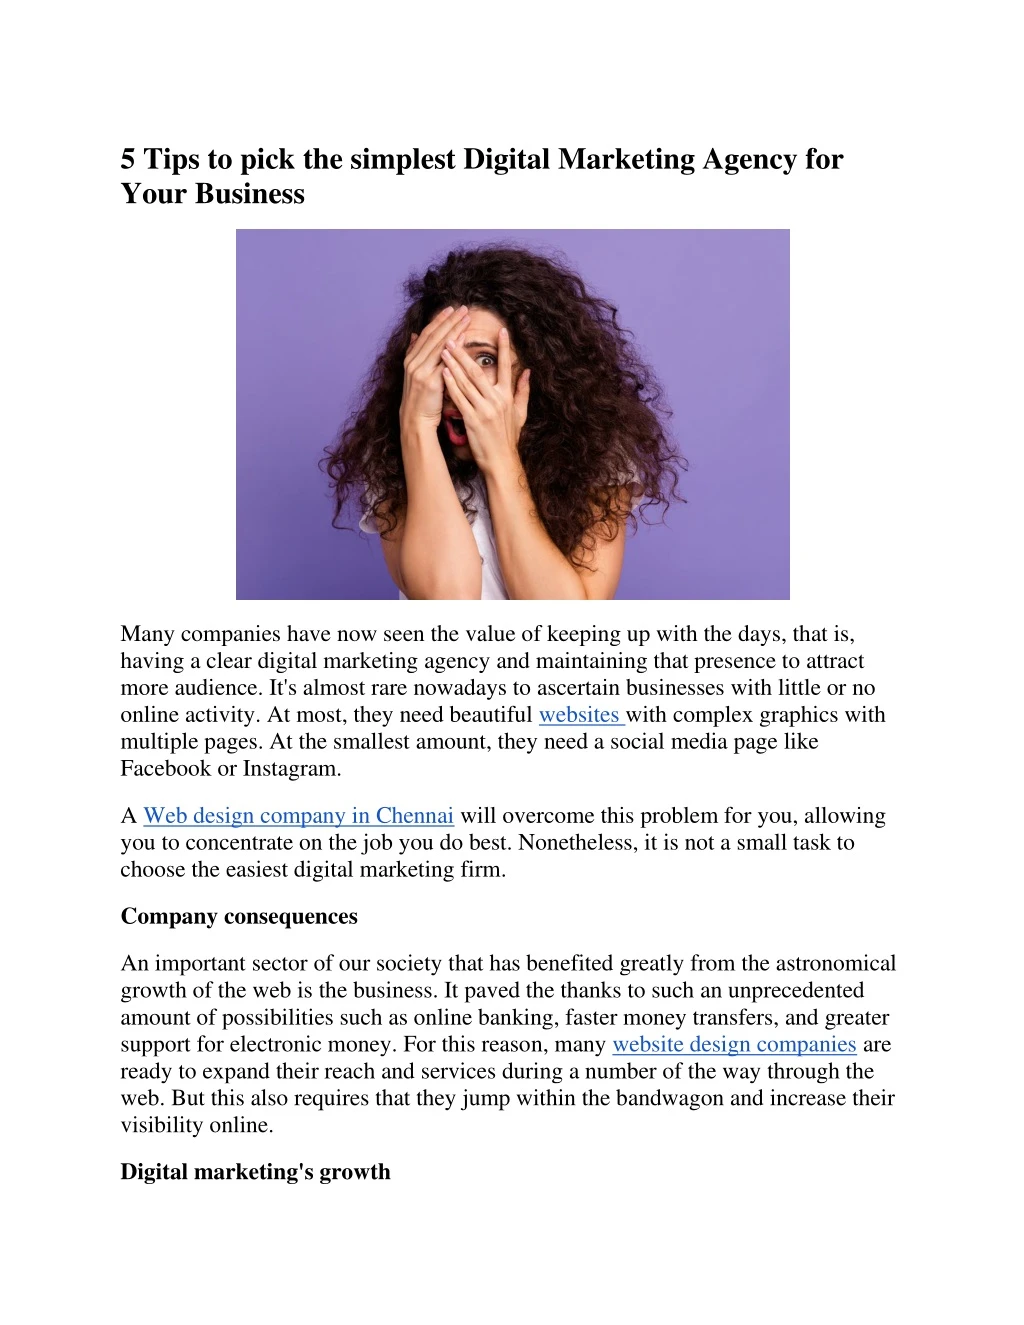 5 tips to pick the simplest digital marketing